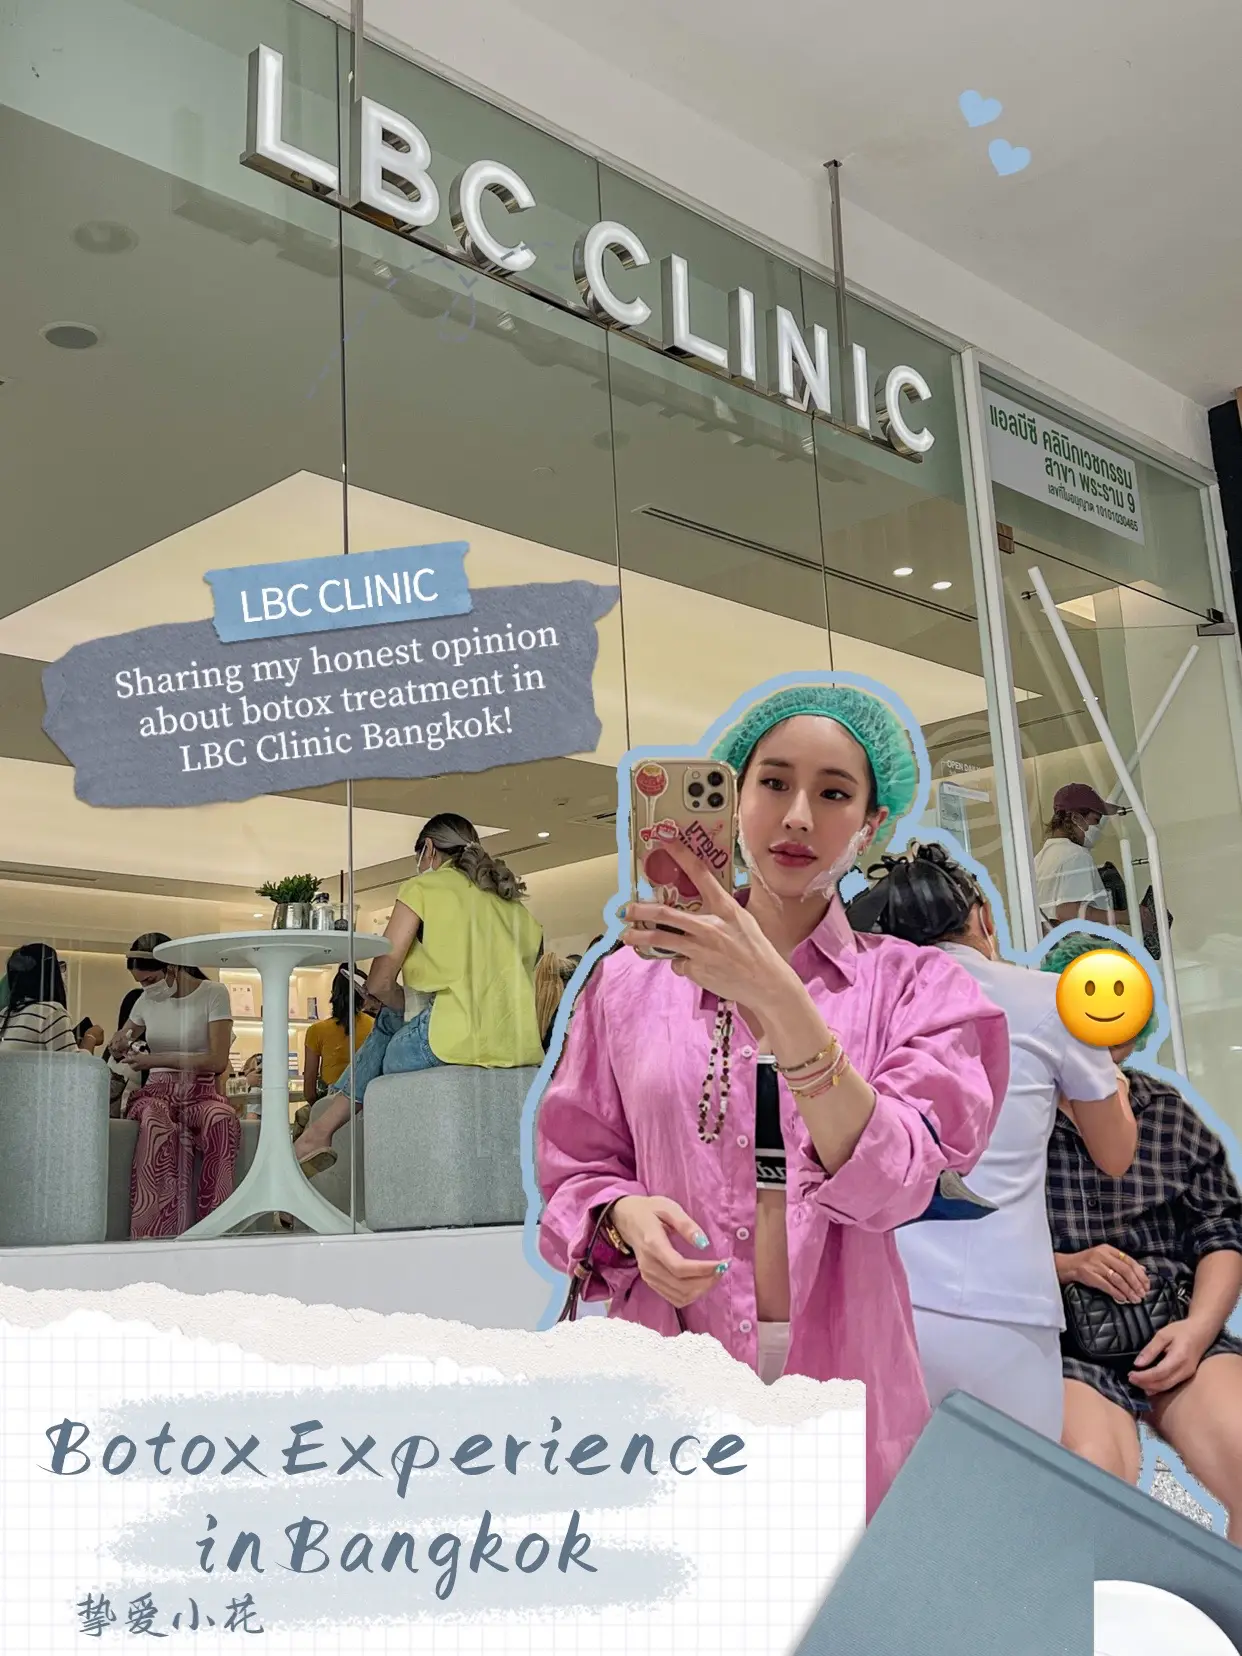 💉My Botox experience at LBC Clinic in Bangkok 🇹🇭's images(0)